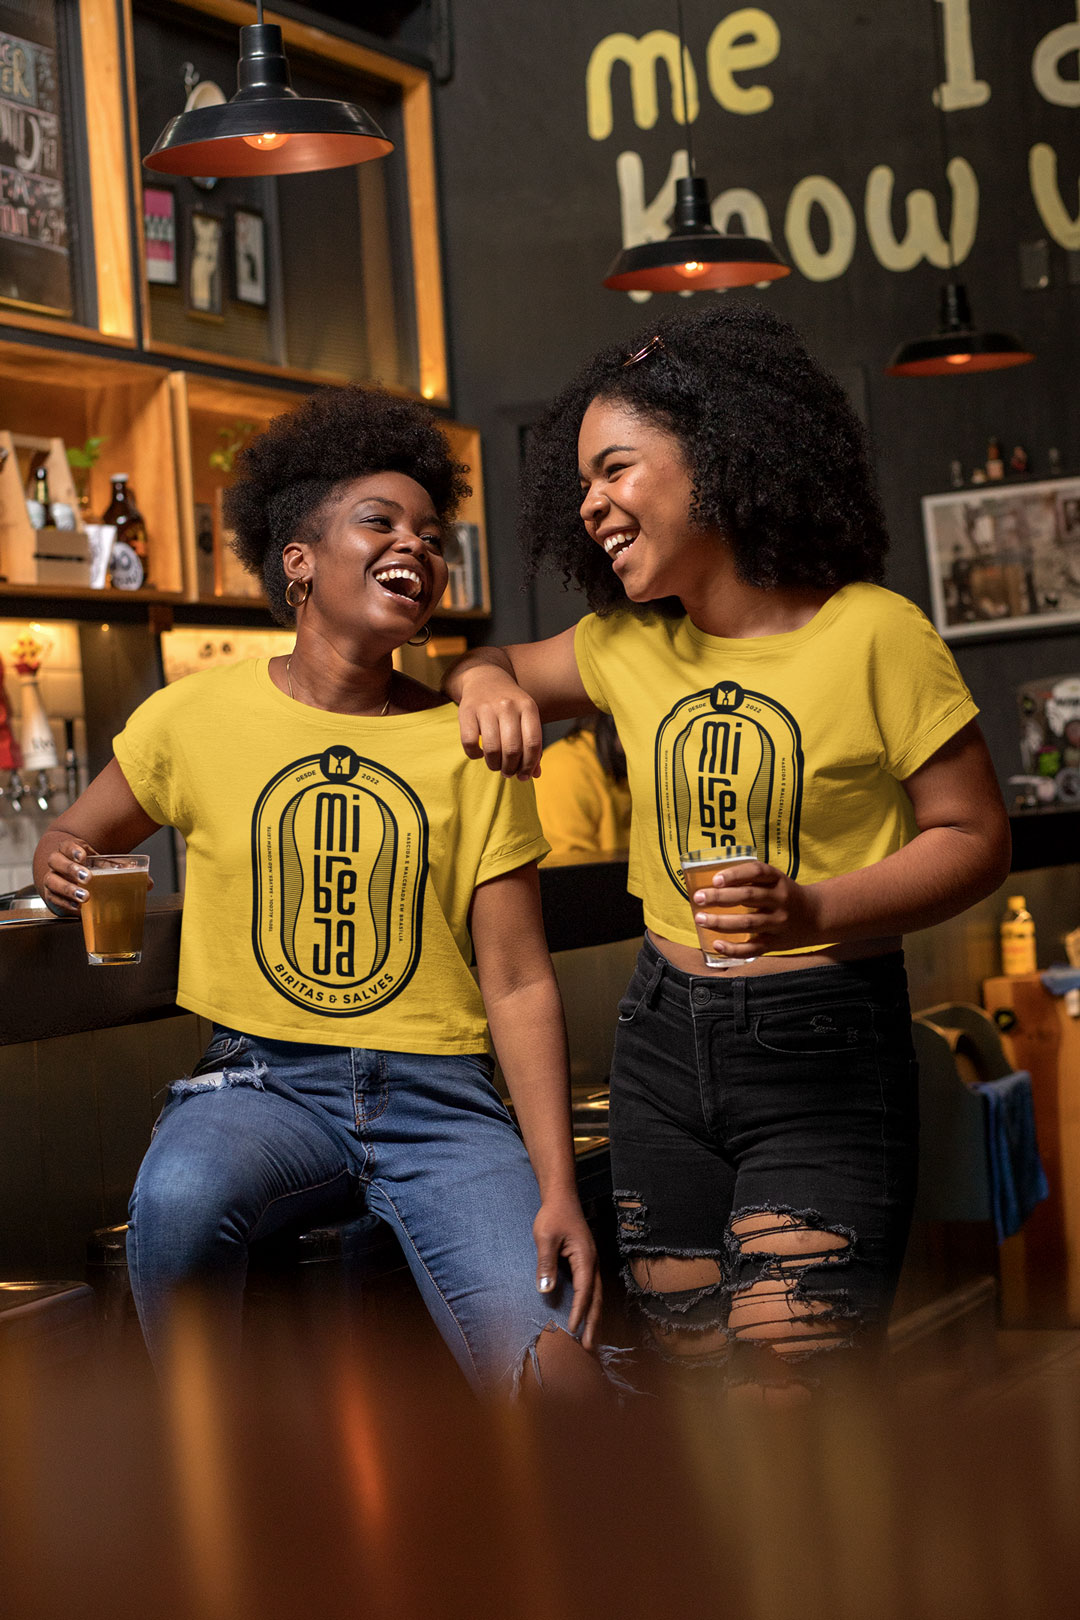 mockup-of-two-friends-with-crop-tops-at-a-bar-32191